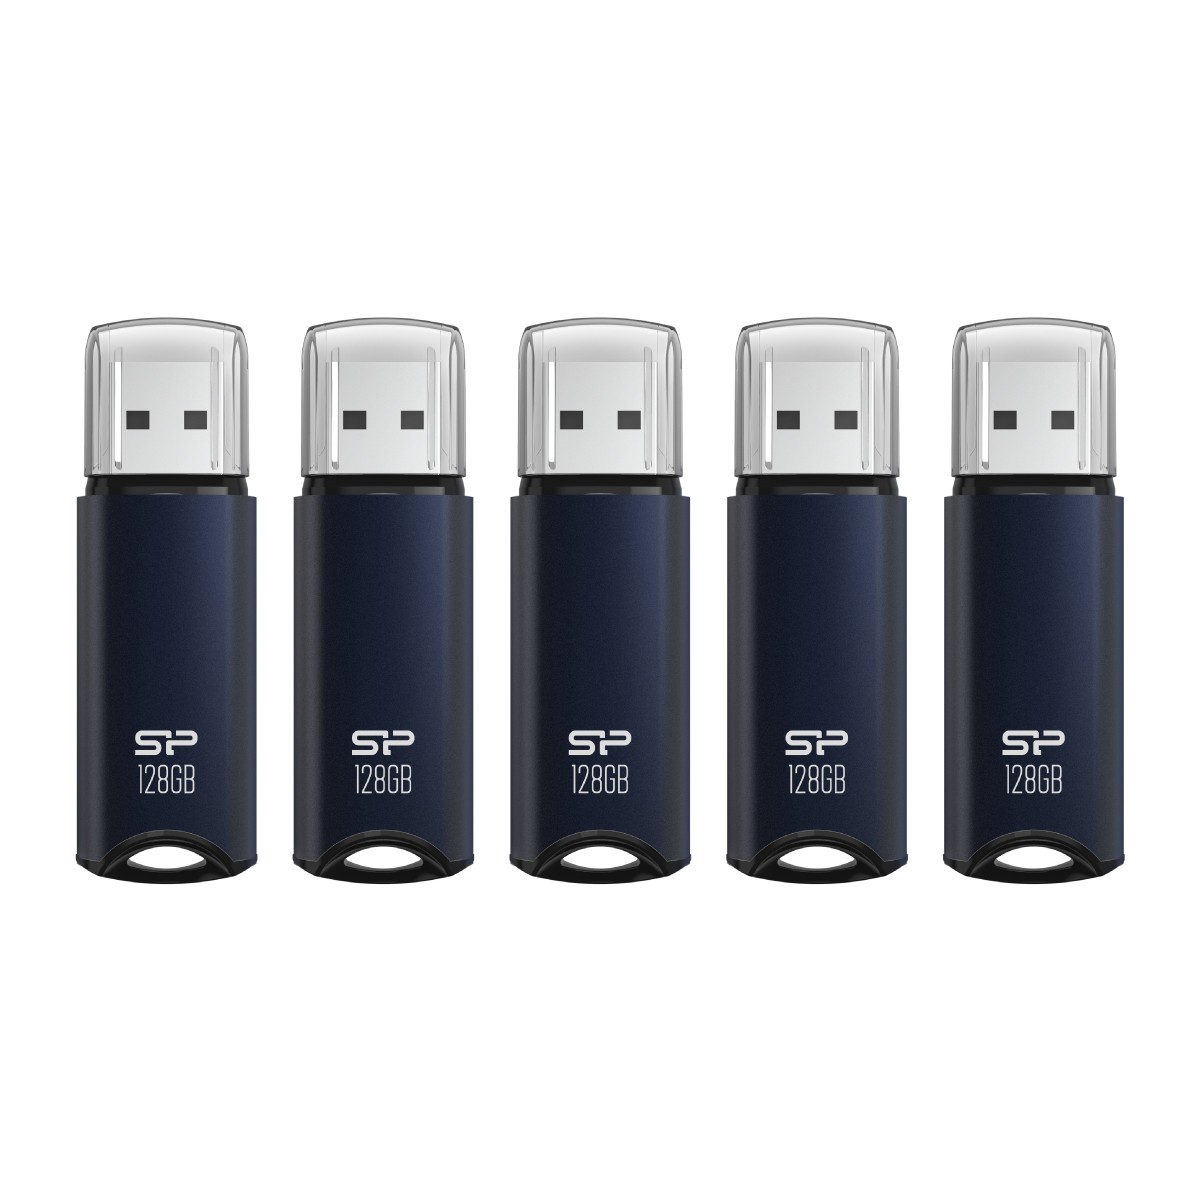 Silicon Power 128GB Marvel M02 USB 3.0 Flash Drive - Navy Blue (5-Pack)